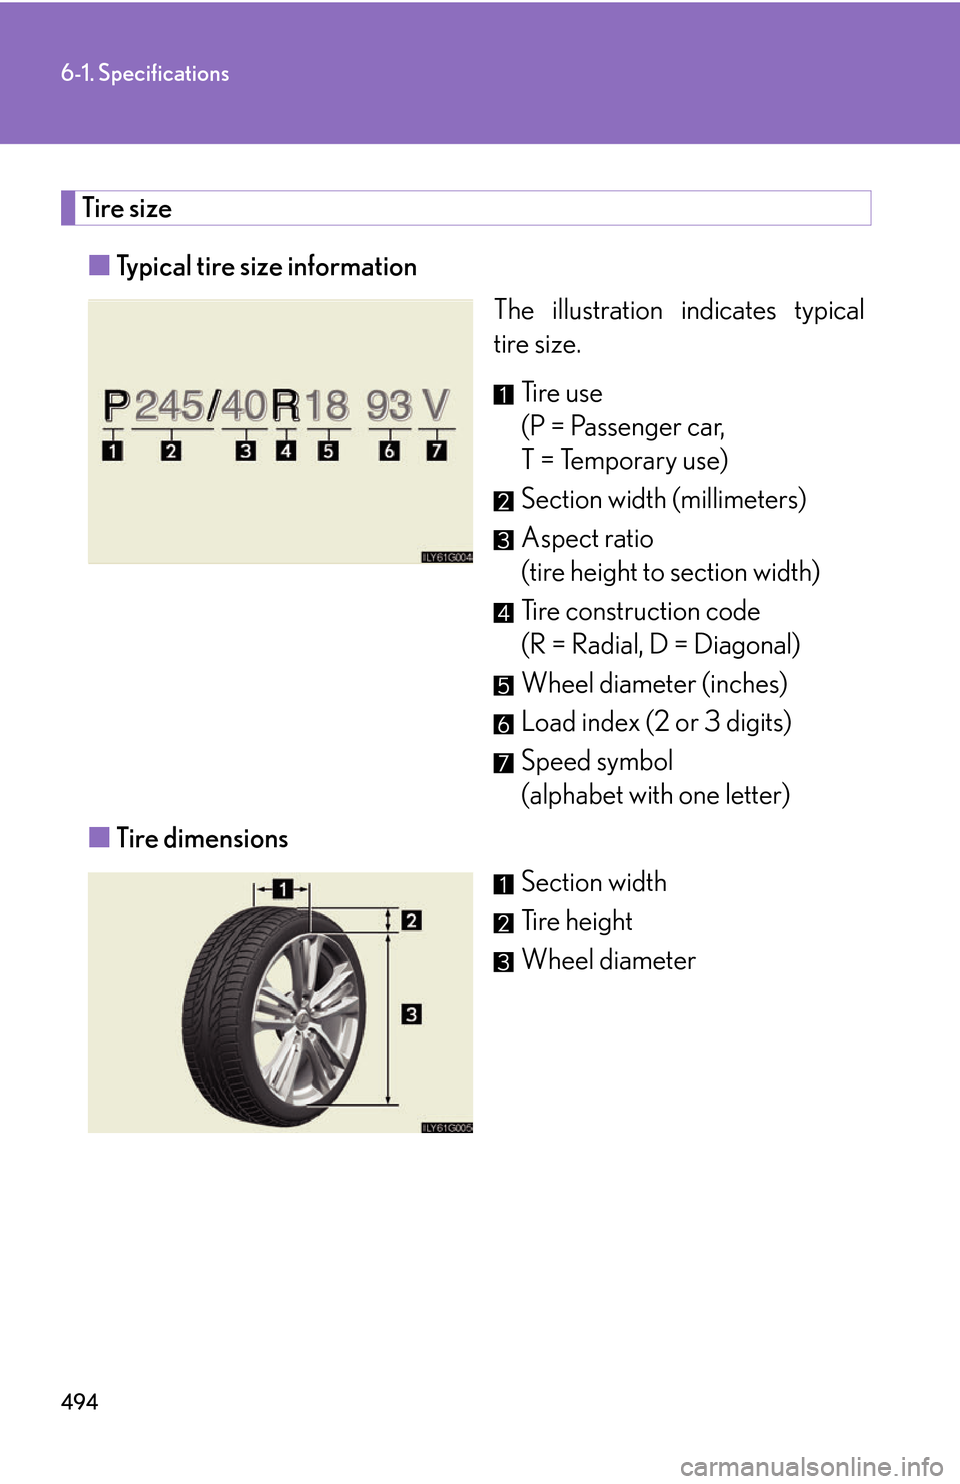 Lexus GS450h 2007  Specifications / LEXUS 2007 GS450H THROUGH JUNE 2006 PROD. OWNERS MANUAL (OM30727U) 494
6-1. Specifications
Tire size
■Typical tire size information
The illustration indicates typical 
tir
e size.
Ti r e  u s e 
(P = Passenger car, 
T = Temporary use)
Section width (millimete